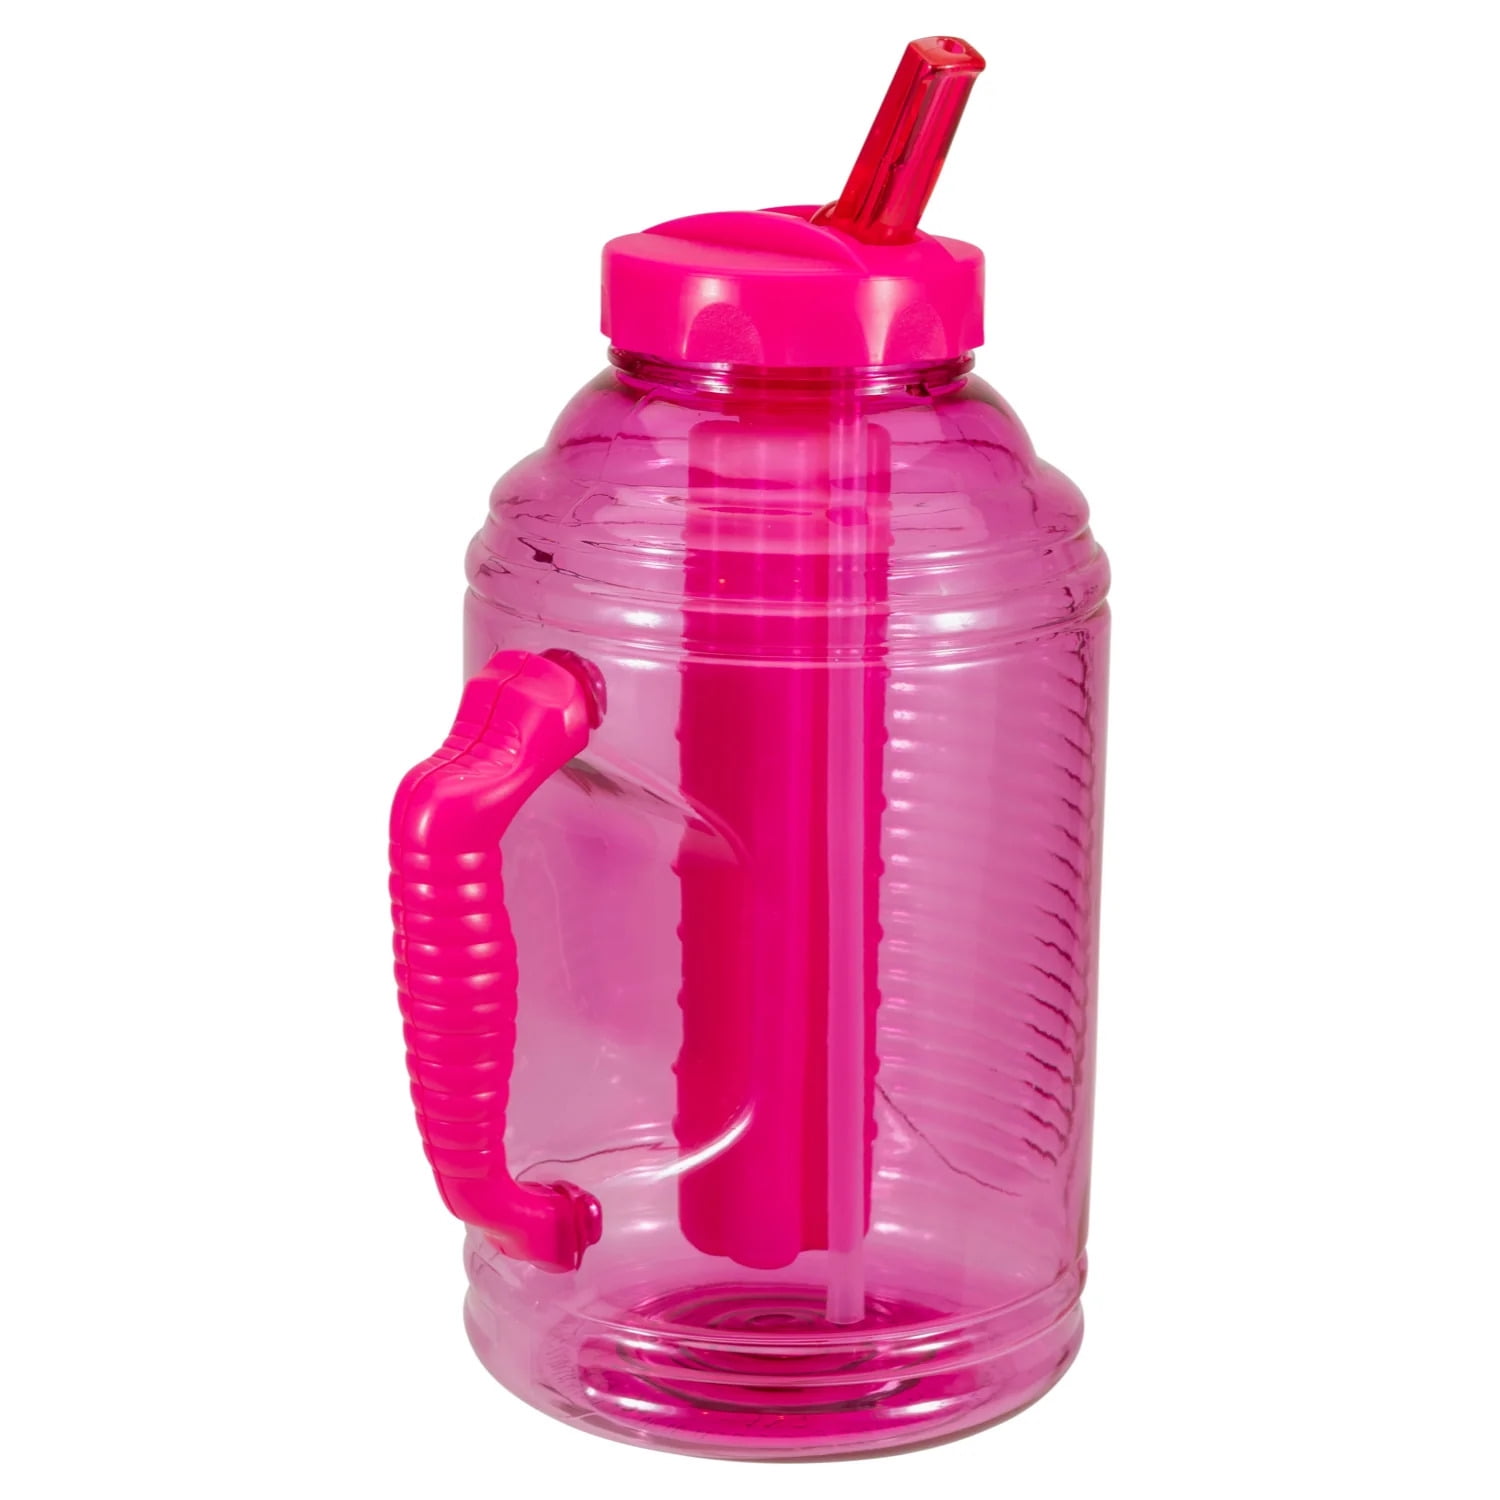 2L Reusable Big Drinks Bottle - Frosted – Phoenix Fitness